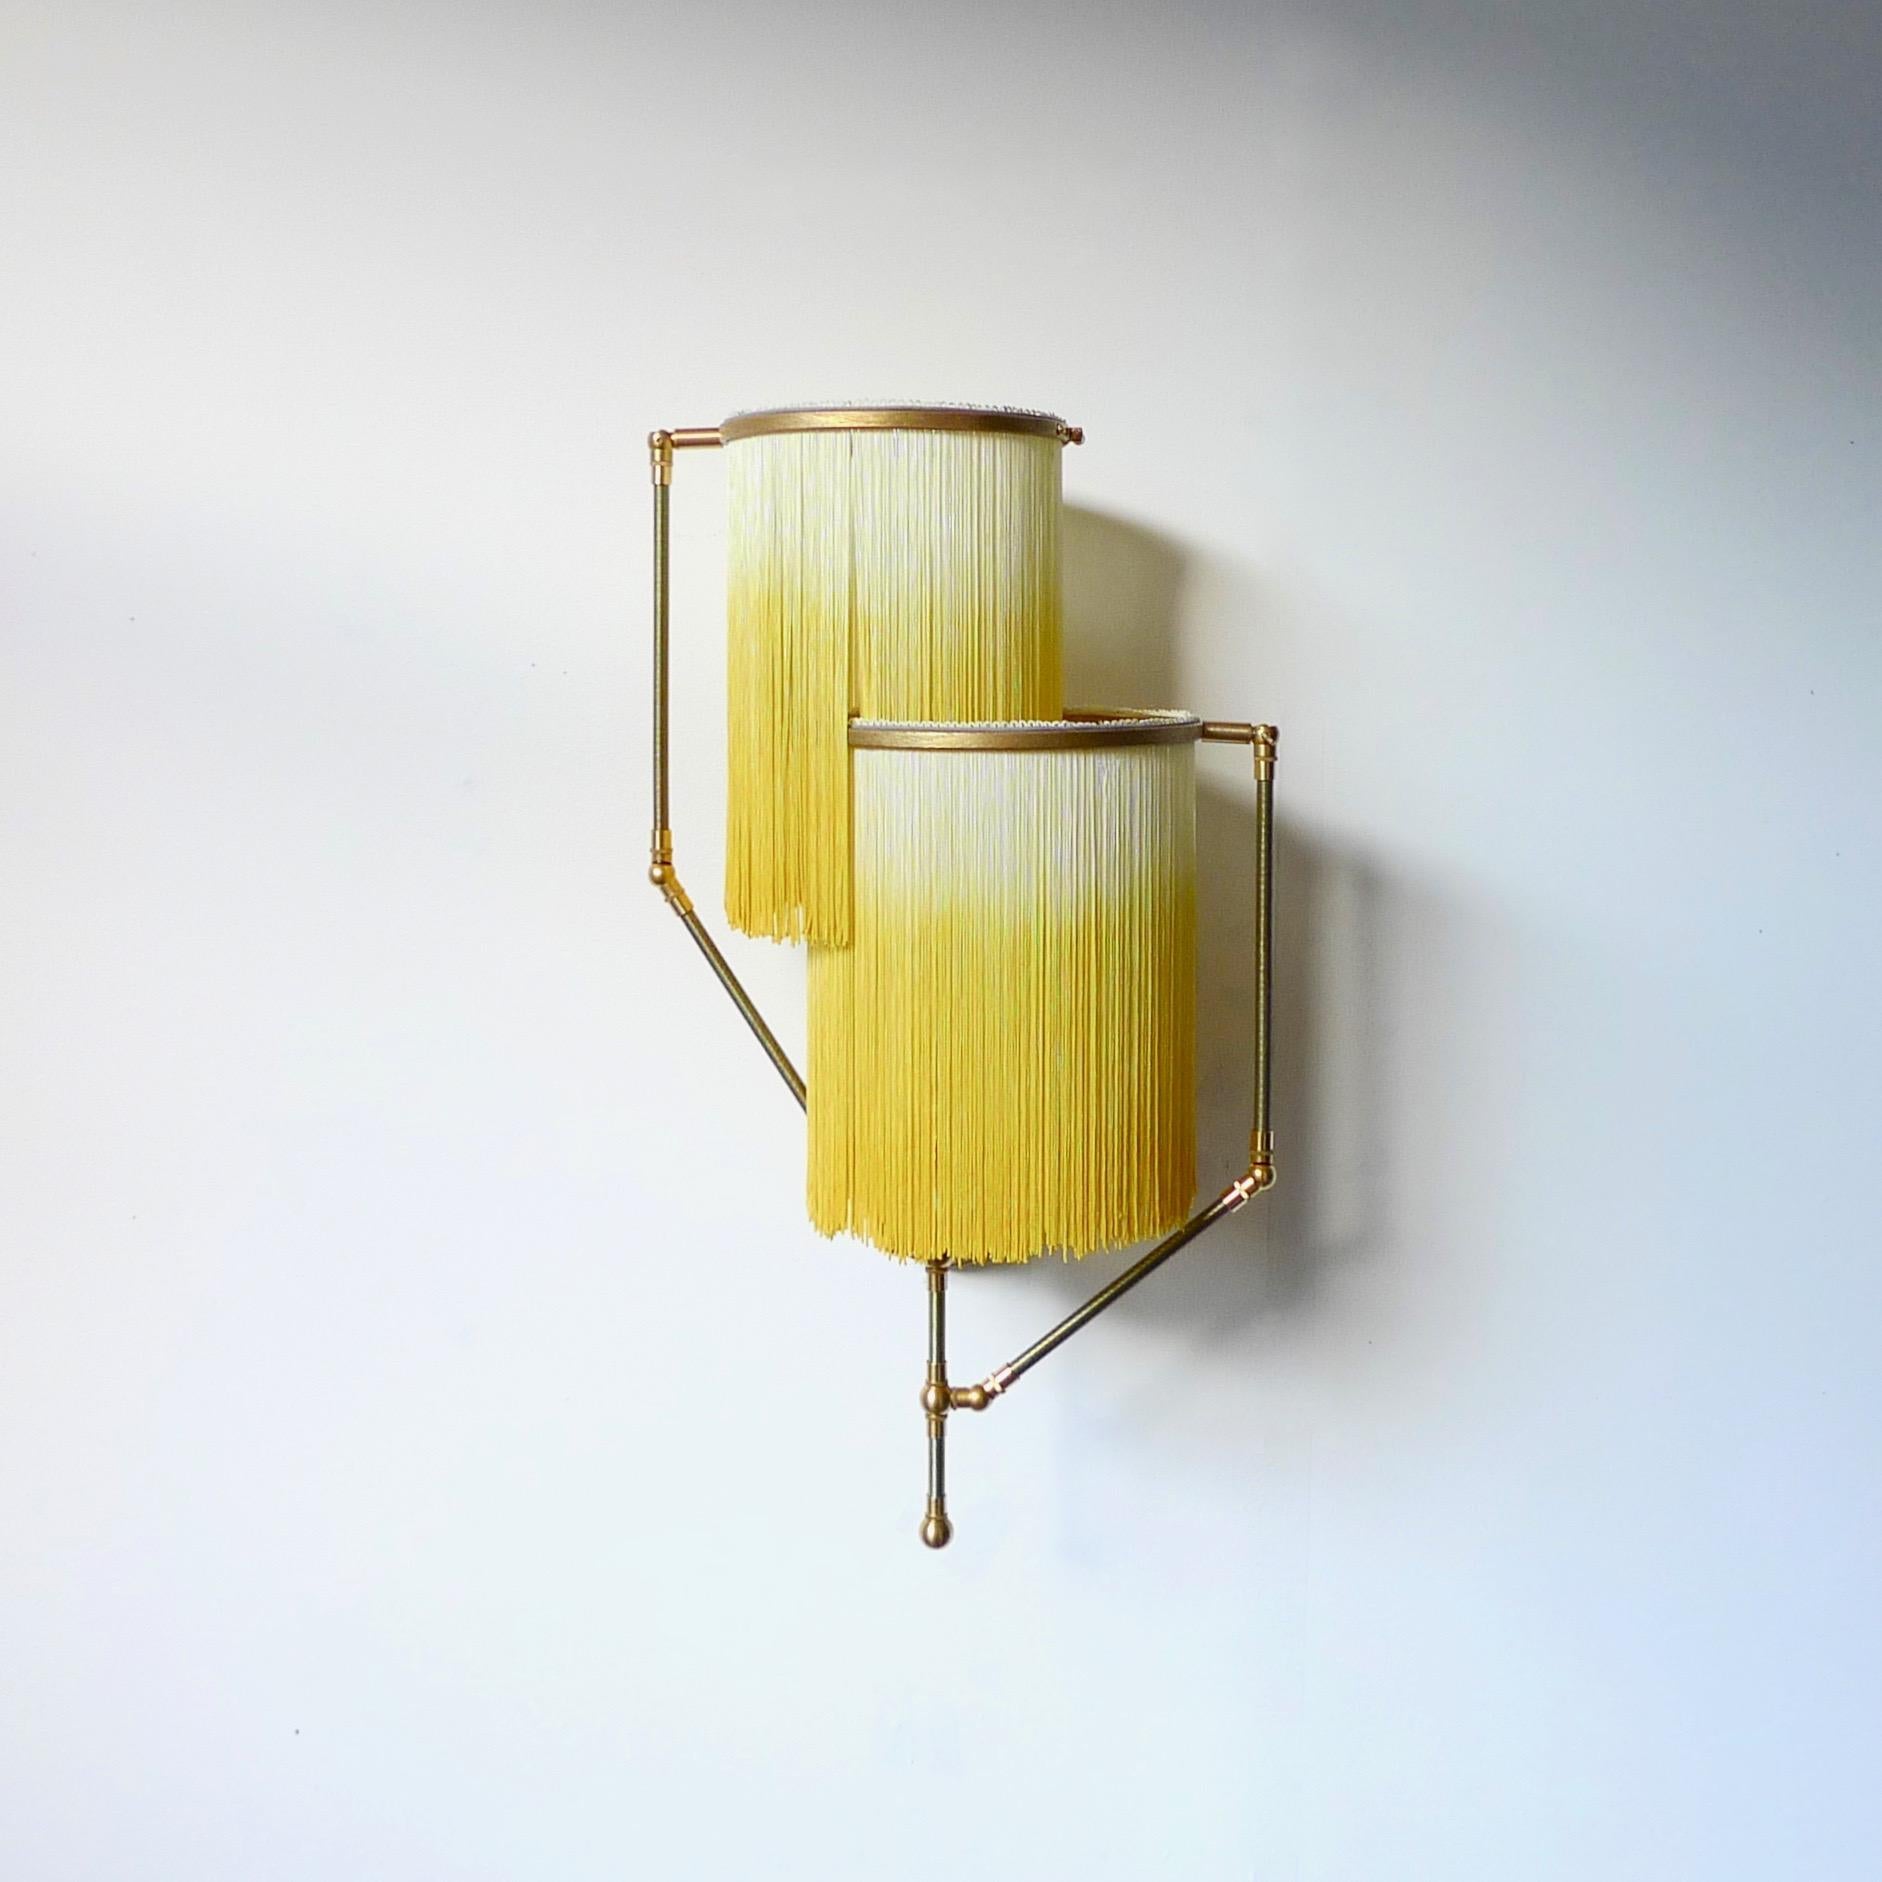 Yellow Charme sconce lamp, Sander Bottinga

Dimensions: 50 x W 38 x D 27 cm
Handmade in brass, leather, wood and dip dyed colored Fringes in viscose.
The movable arms makes it possible to move the circles with fringes in different positions.
So you